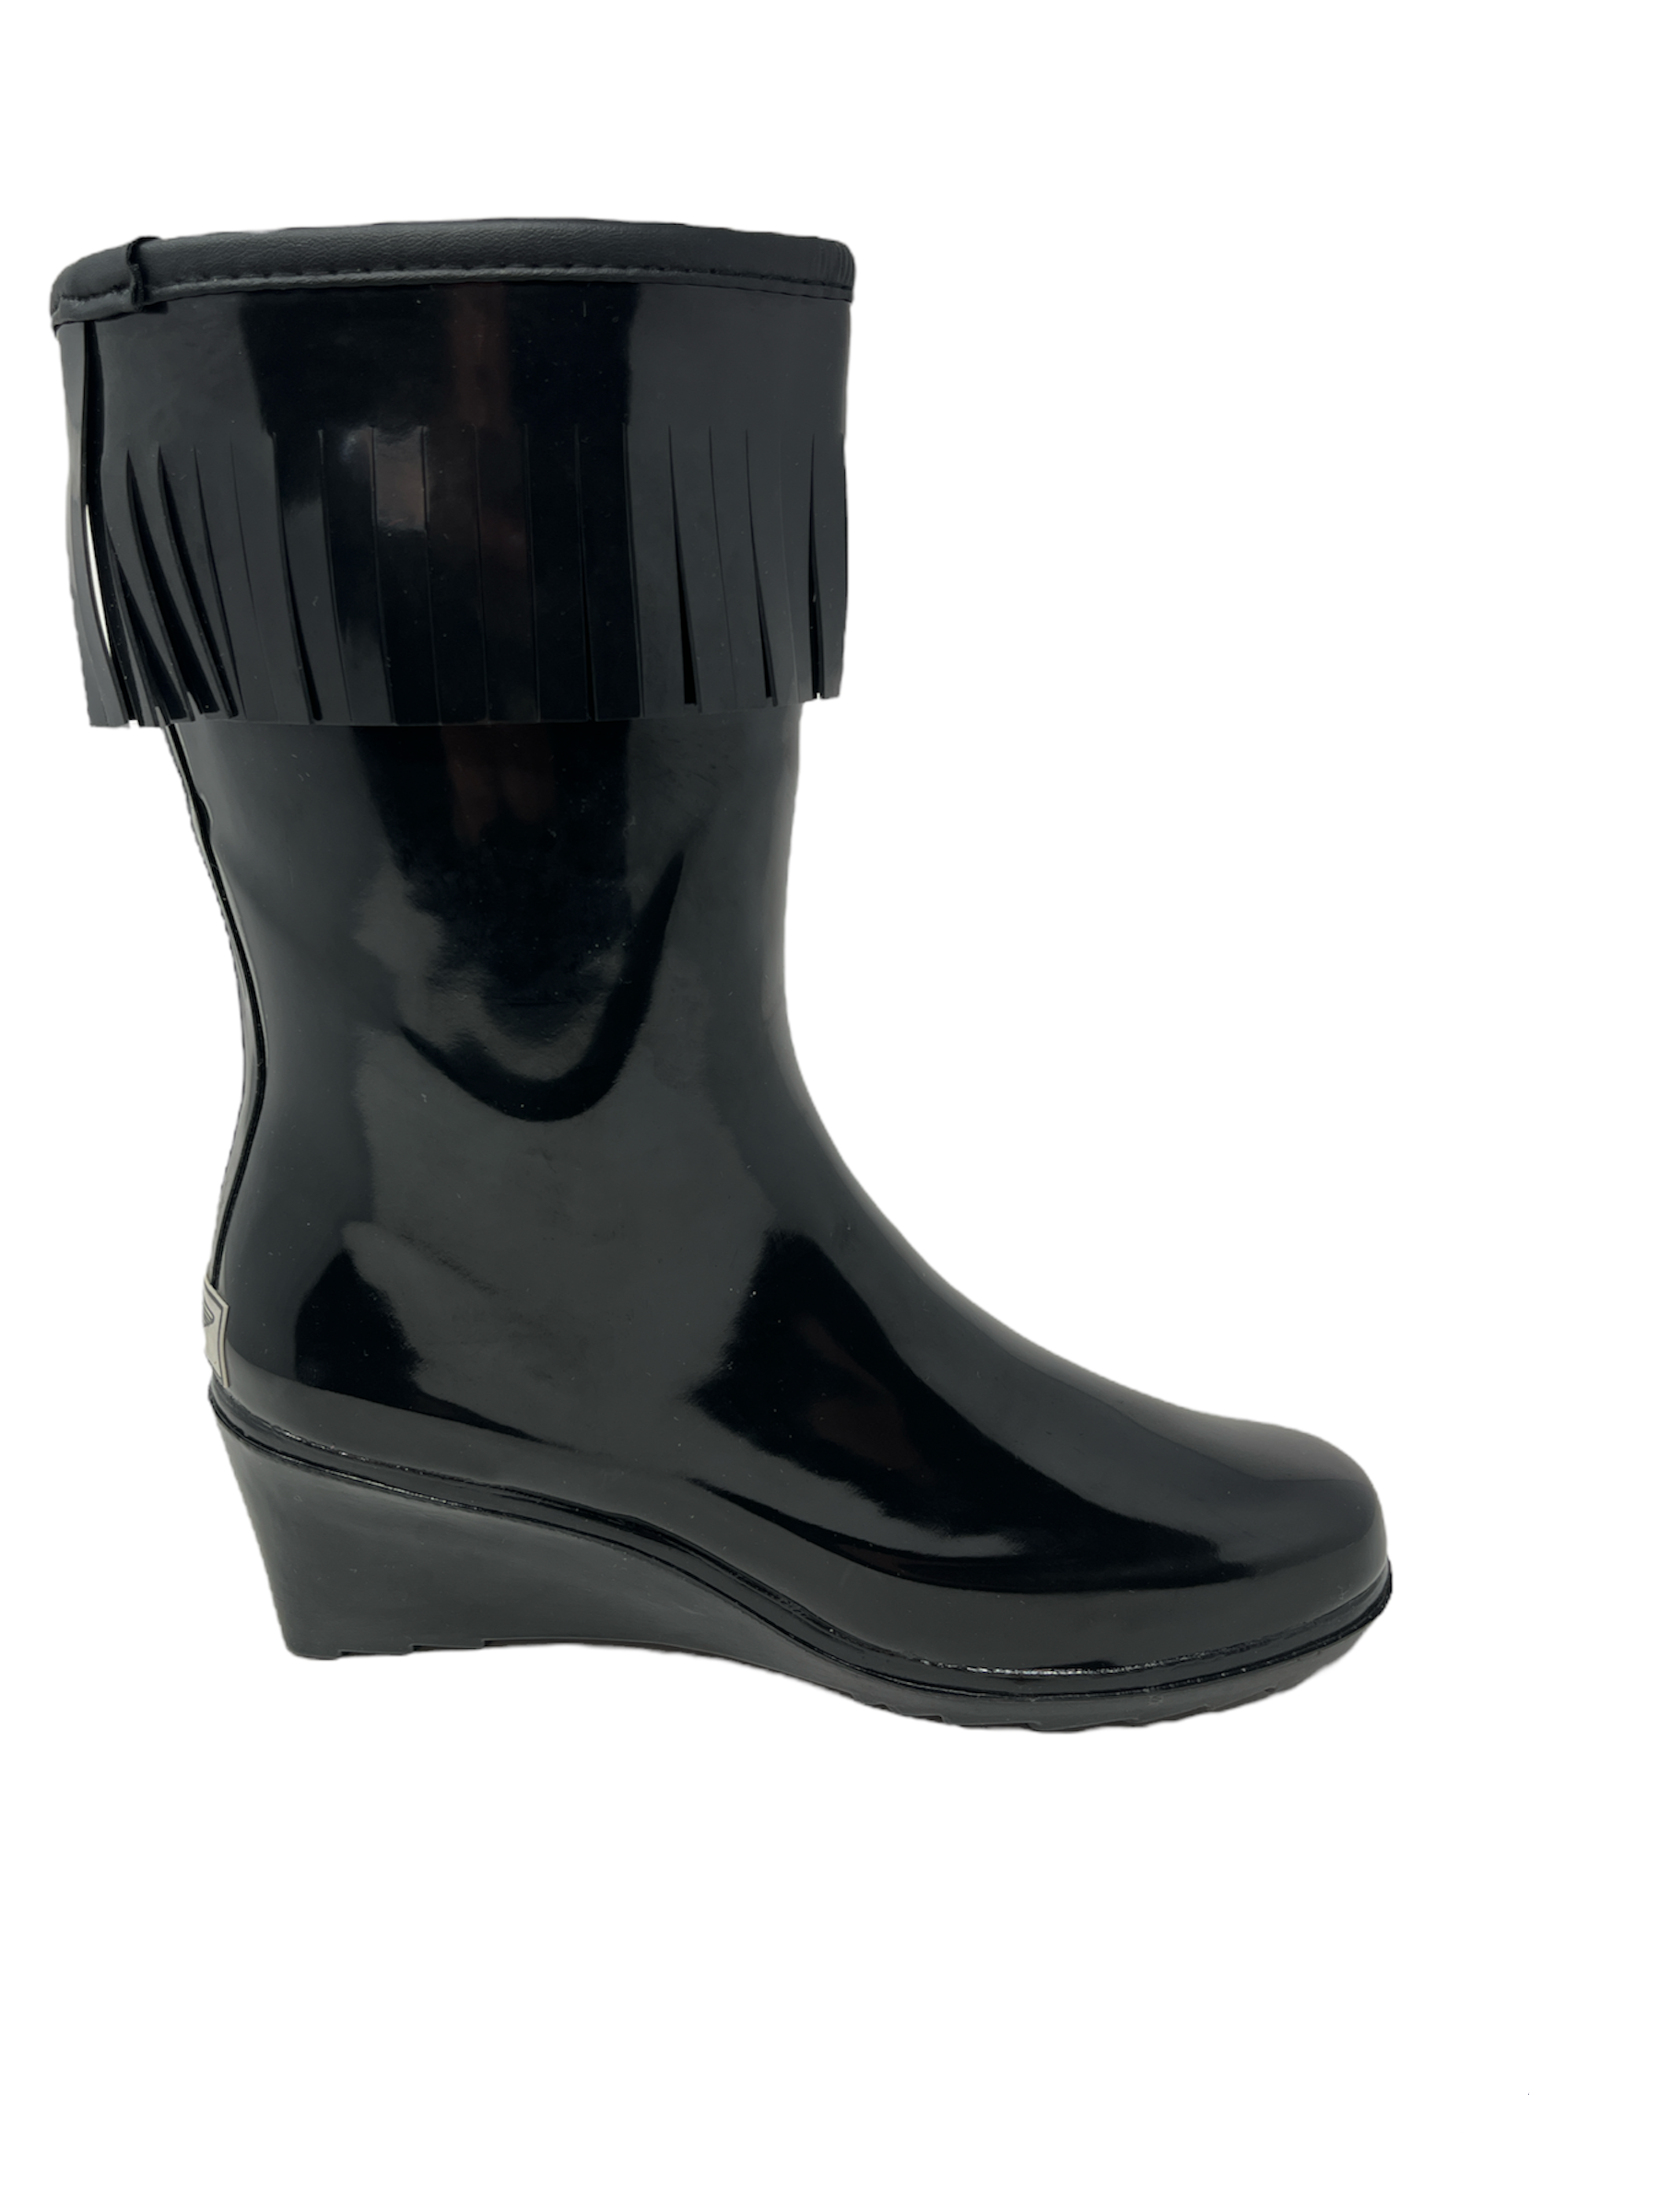 Forever Young Women's Fringed Short Wedge Rain Boot - image 5 of 5